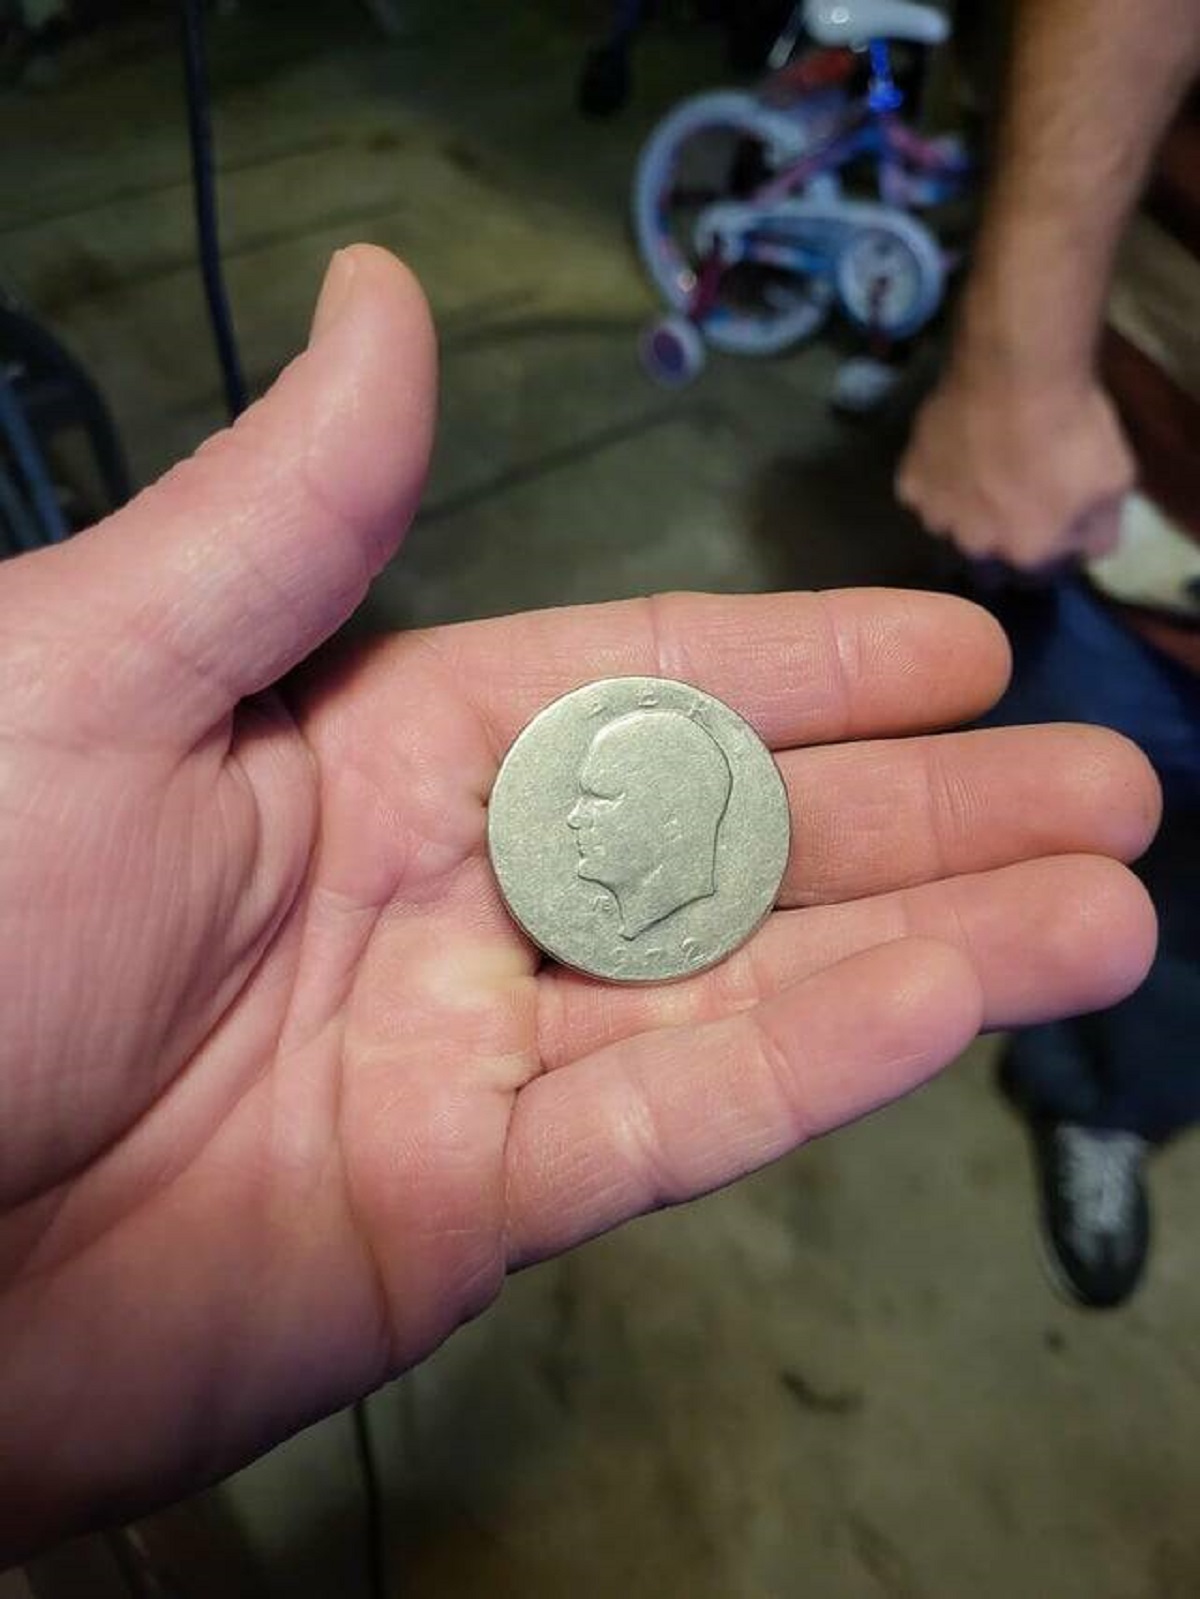 "Coin that my wife's dad has carried in his pocket everday for 27 years"